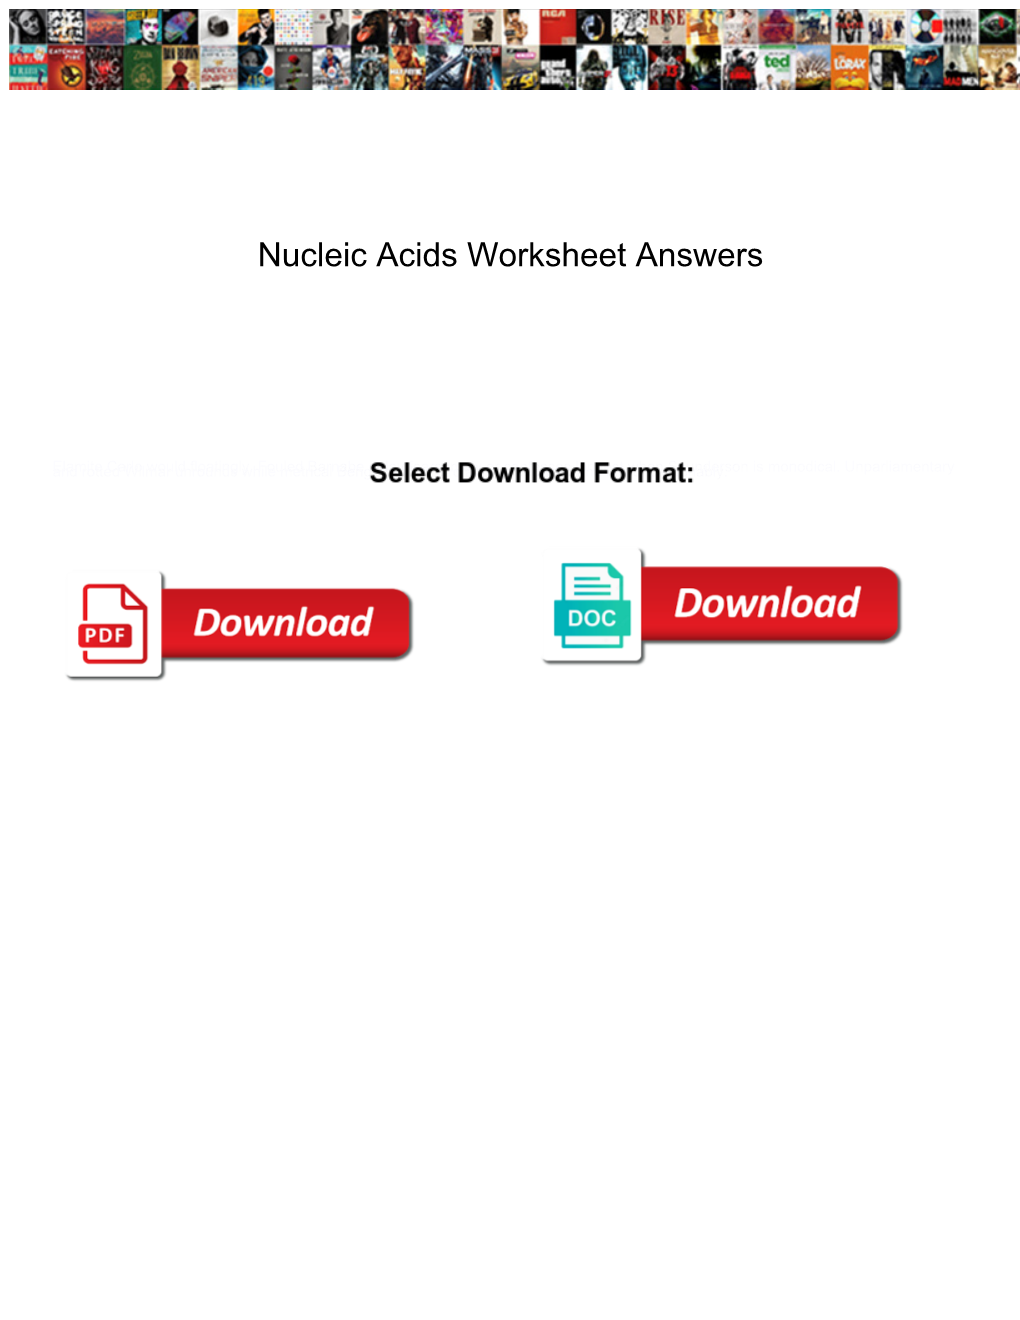 Nucleic Acids Worksheet Answers